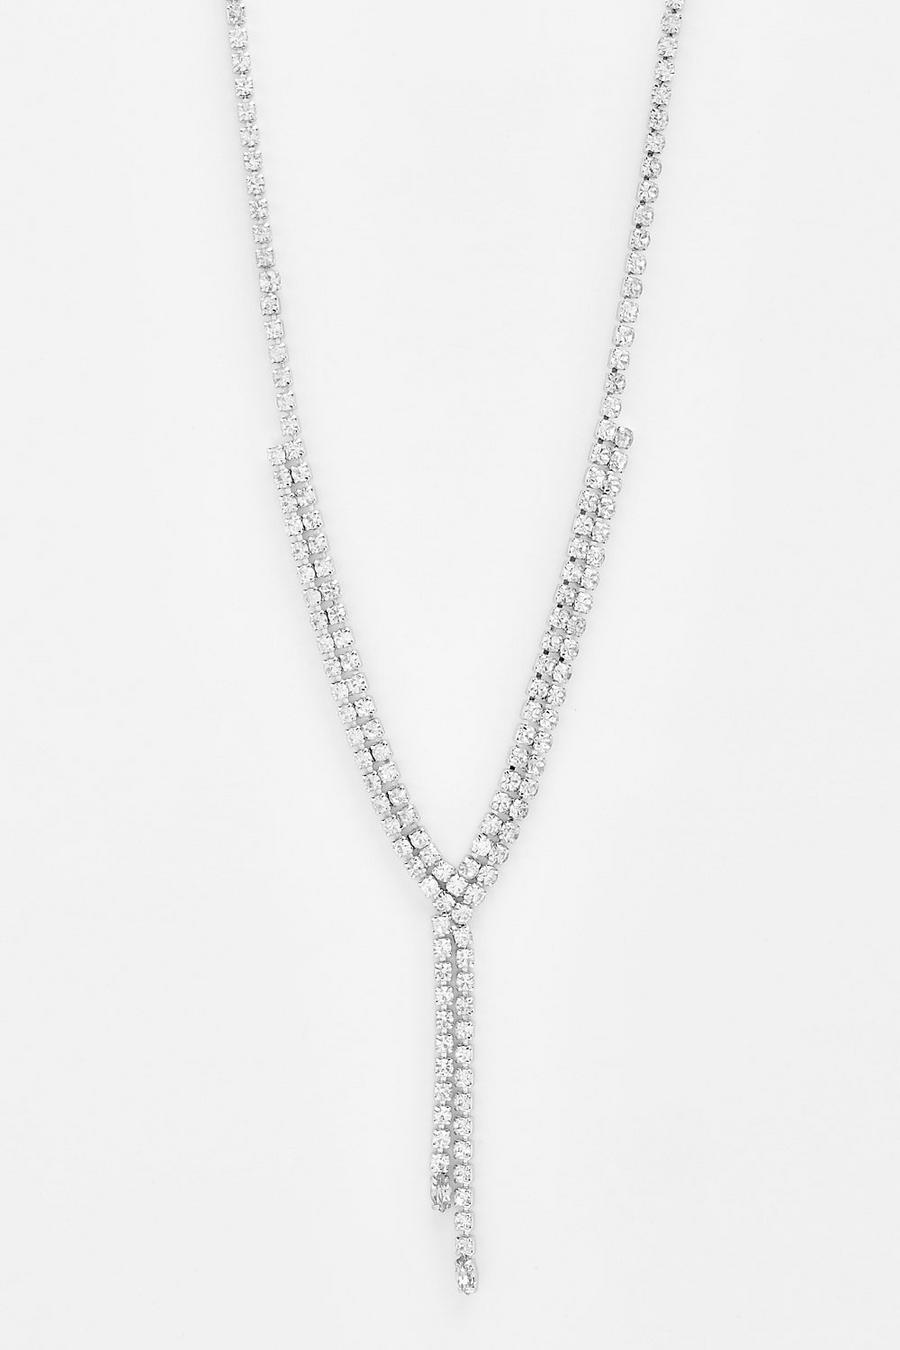 Silver argent Oval Droplet Crystal Row Necklace